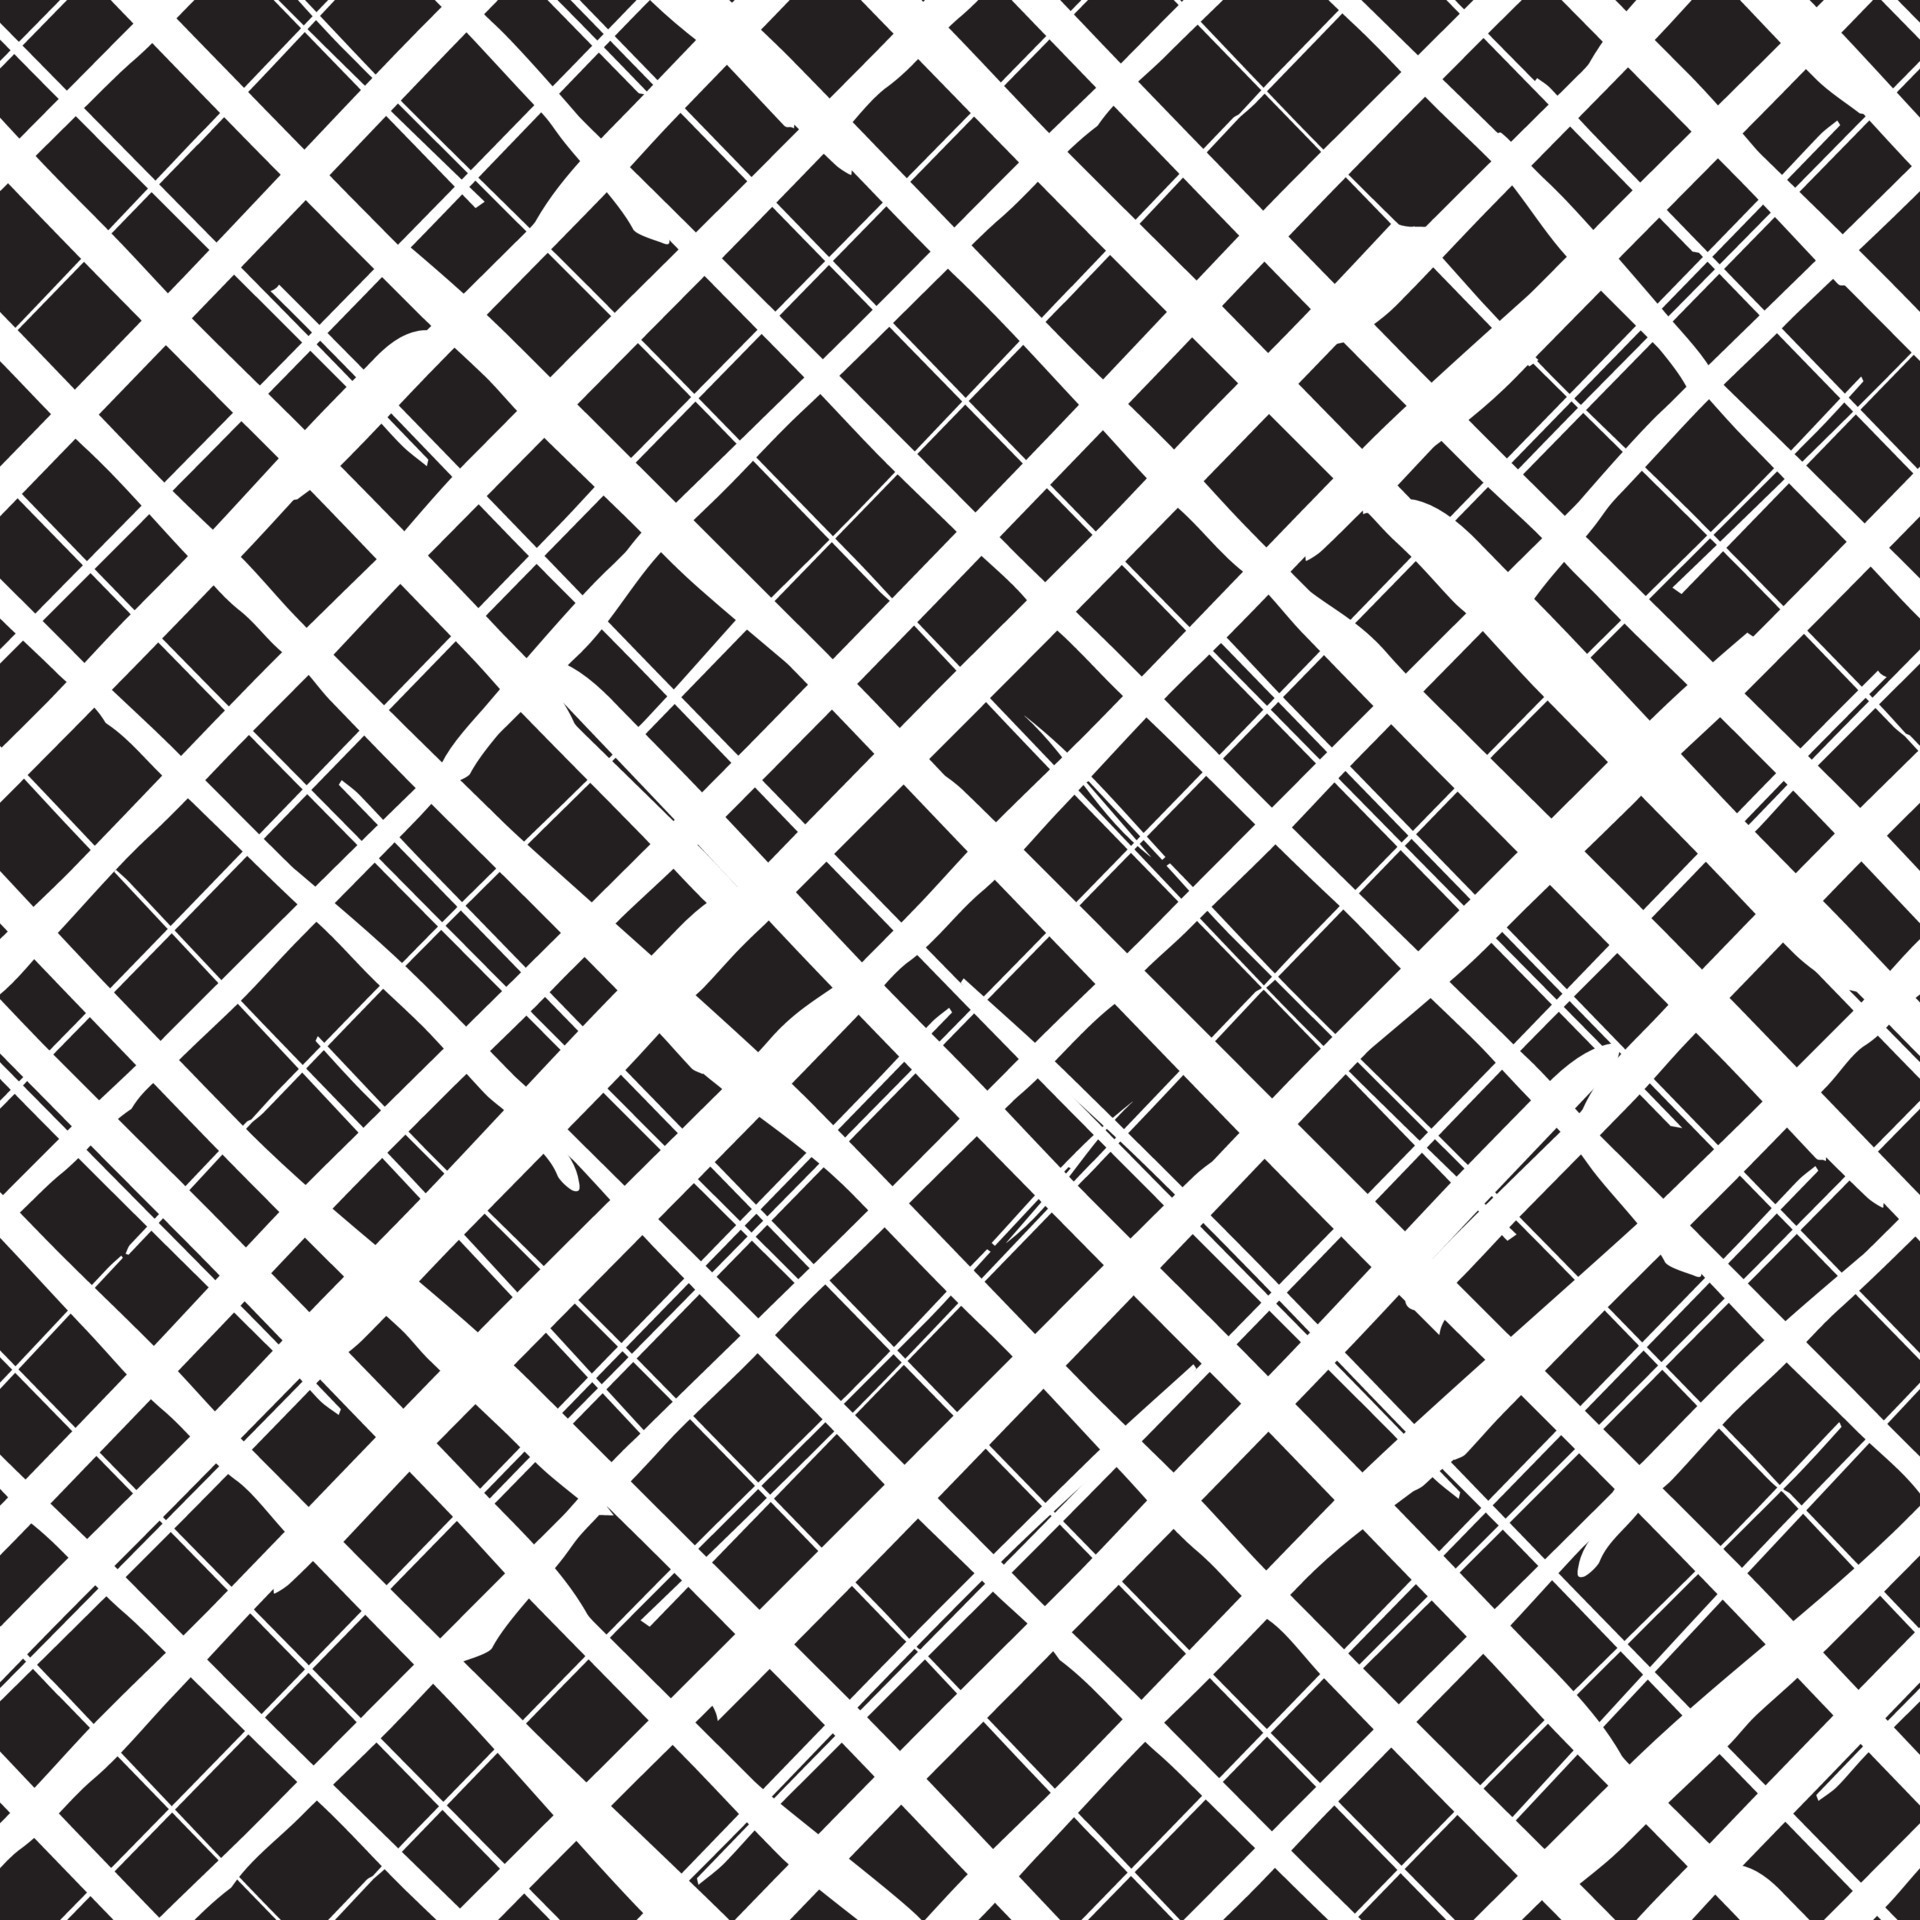 Buy Black  White Dots  Dashes Wallpaper at 8 OFF by The Wall Chronicles   Pepperfry